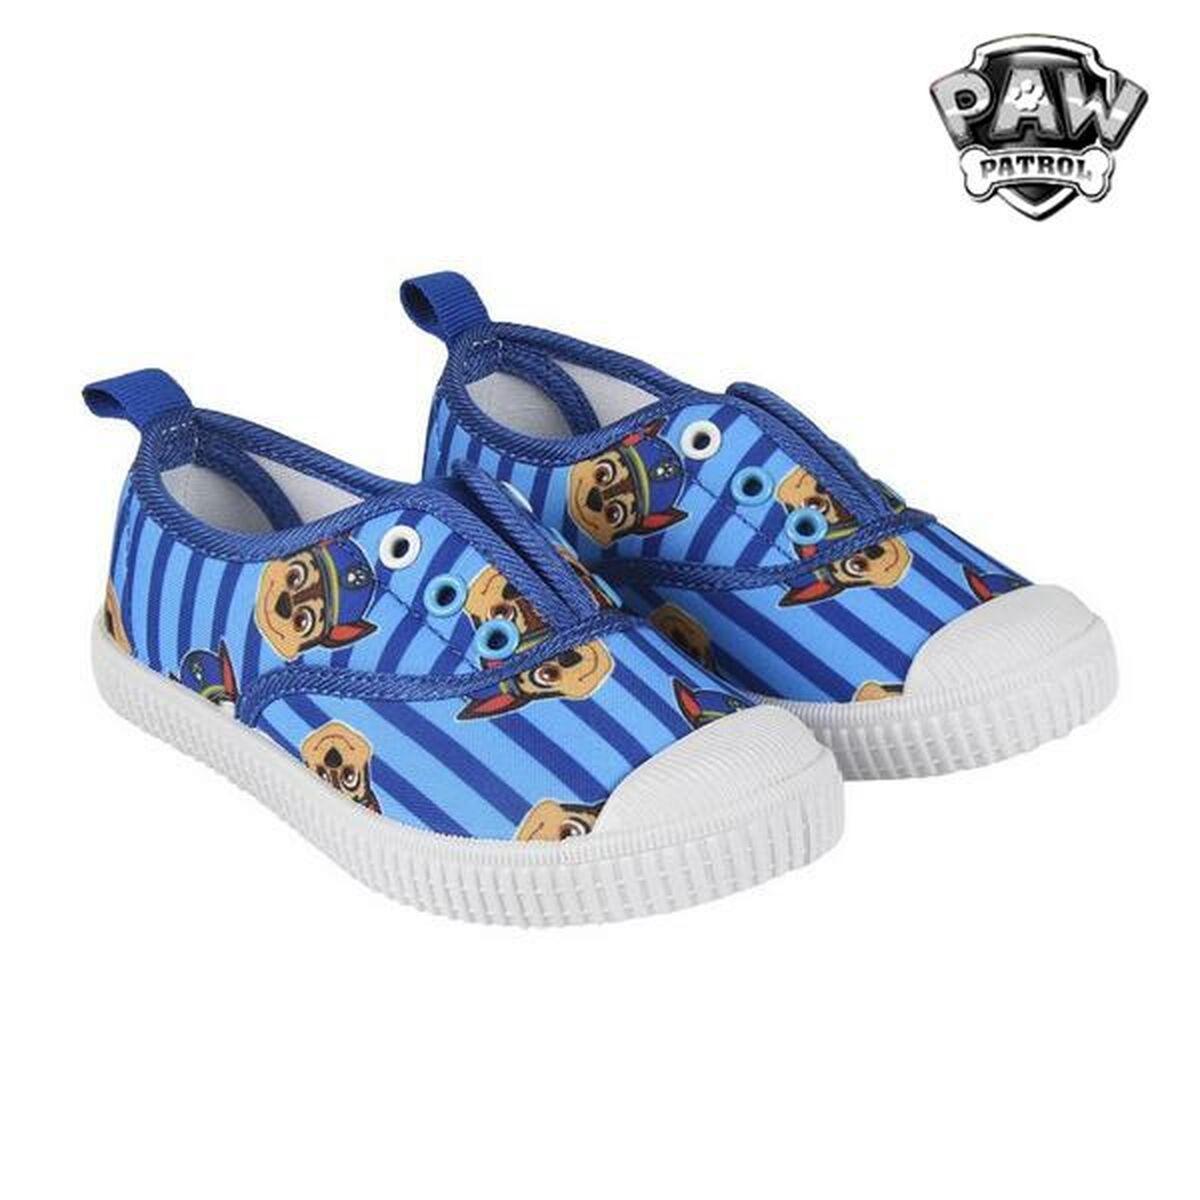 Chaussures casual enfant The Paw Patrol 73563 Blue marine